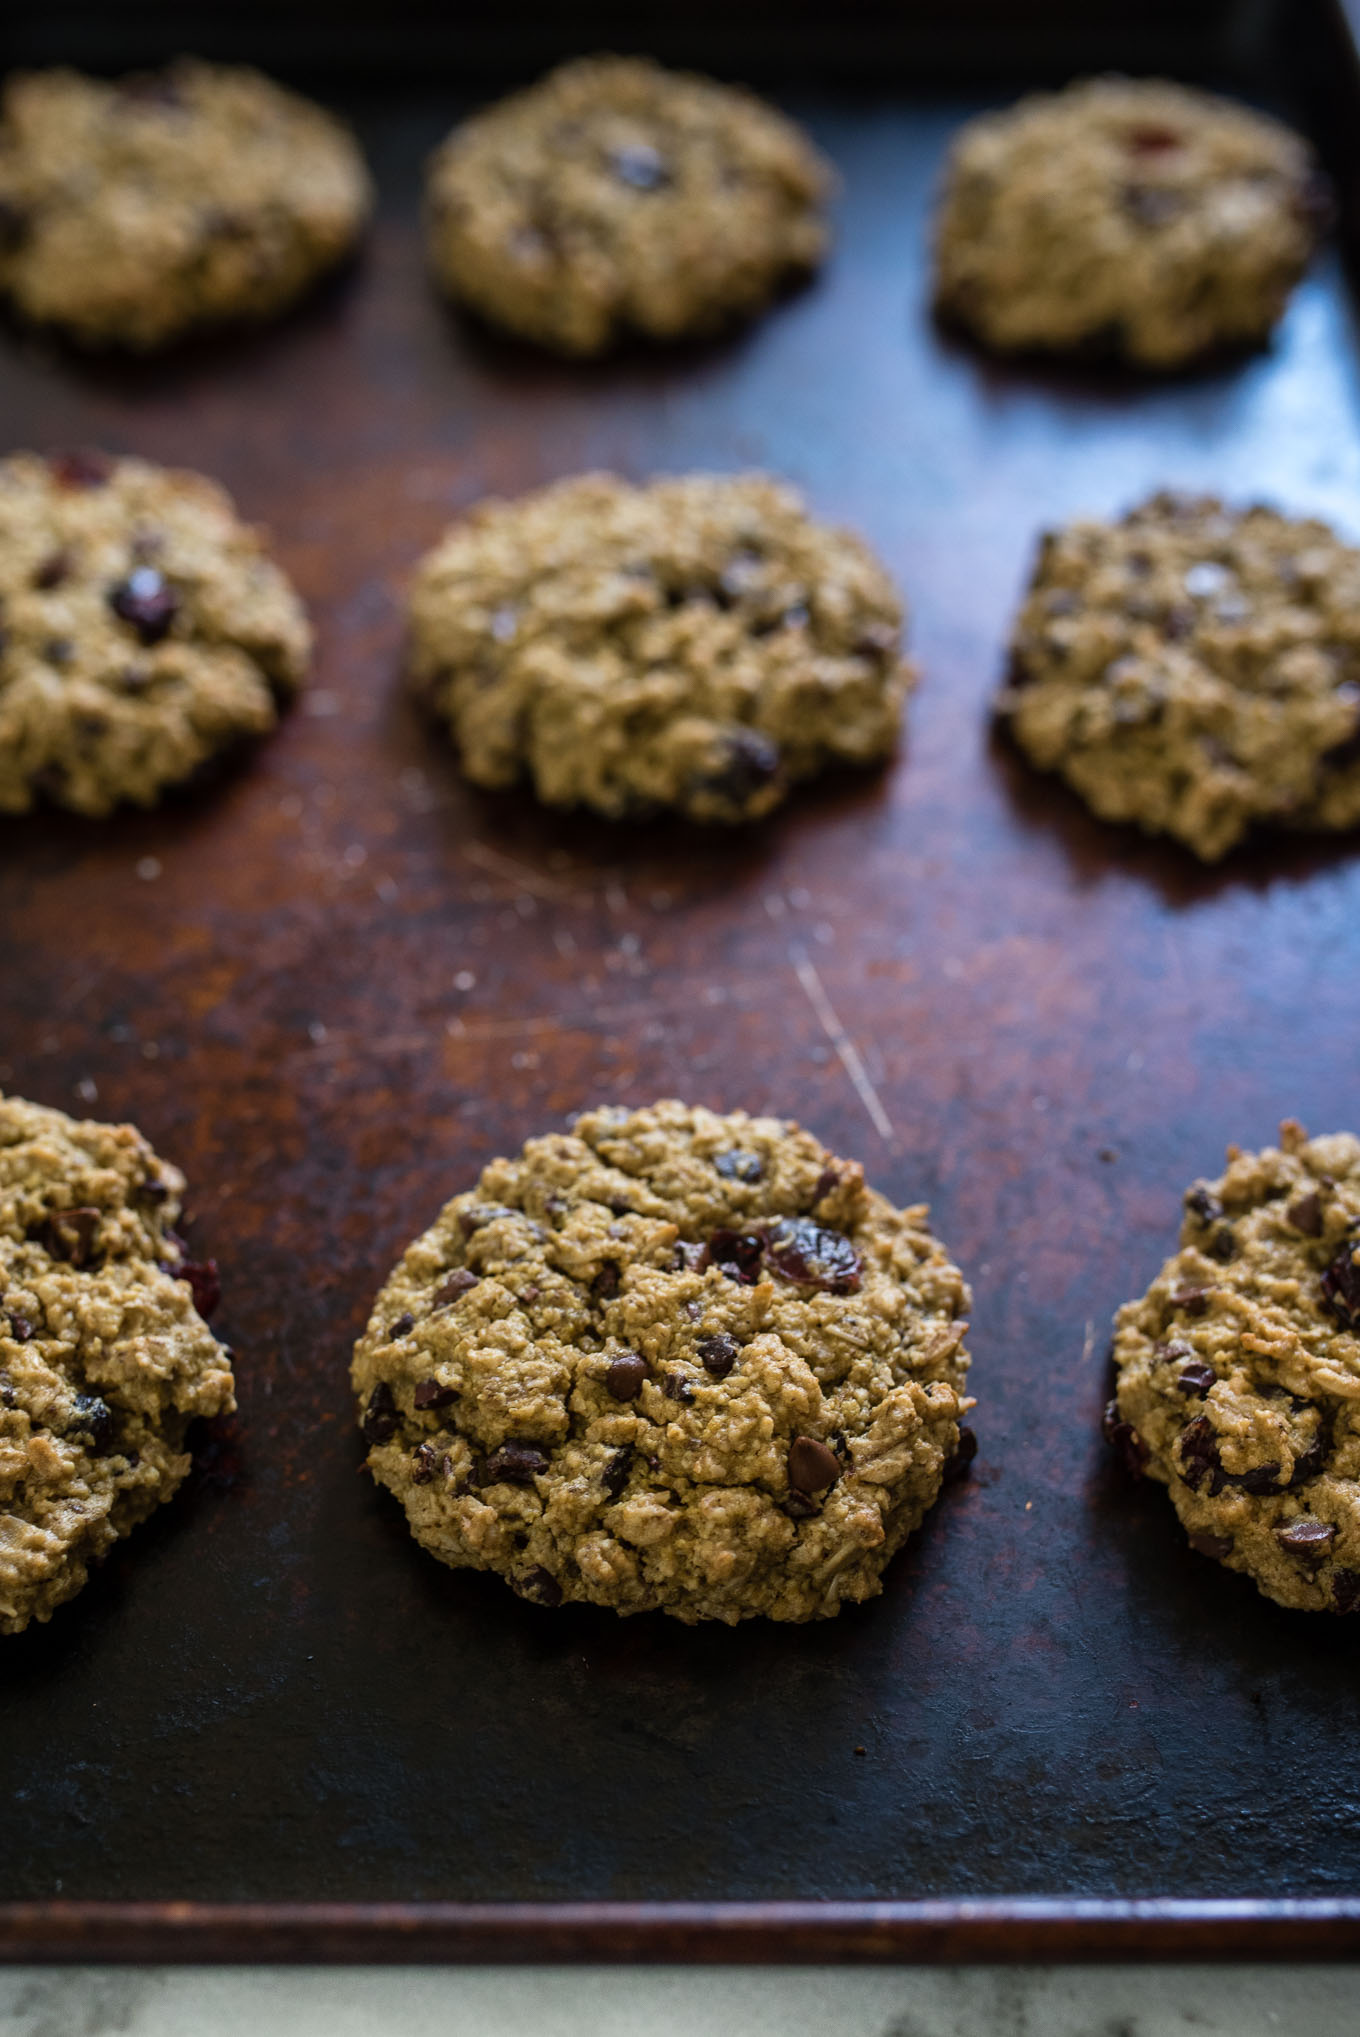 Lunch Box Cookies are both nutritious and delicious- a hearty soft cookie packed with oats, chocolate chips, cranberries, cocoa nibs and reduced amounts of sugar and oil.